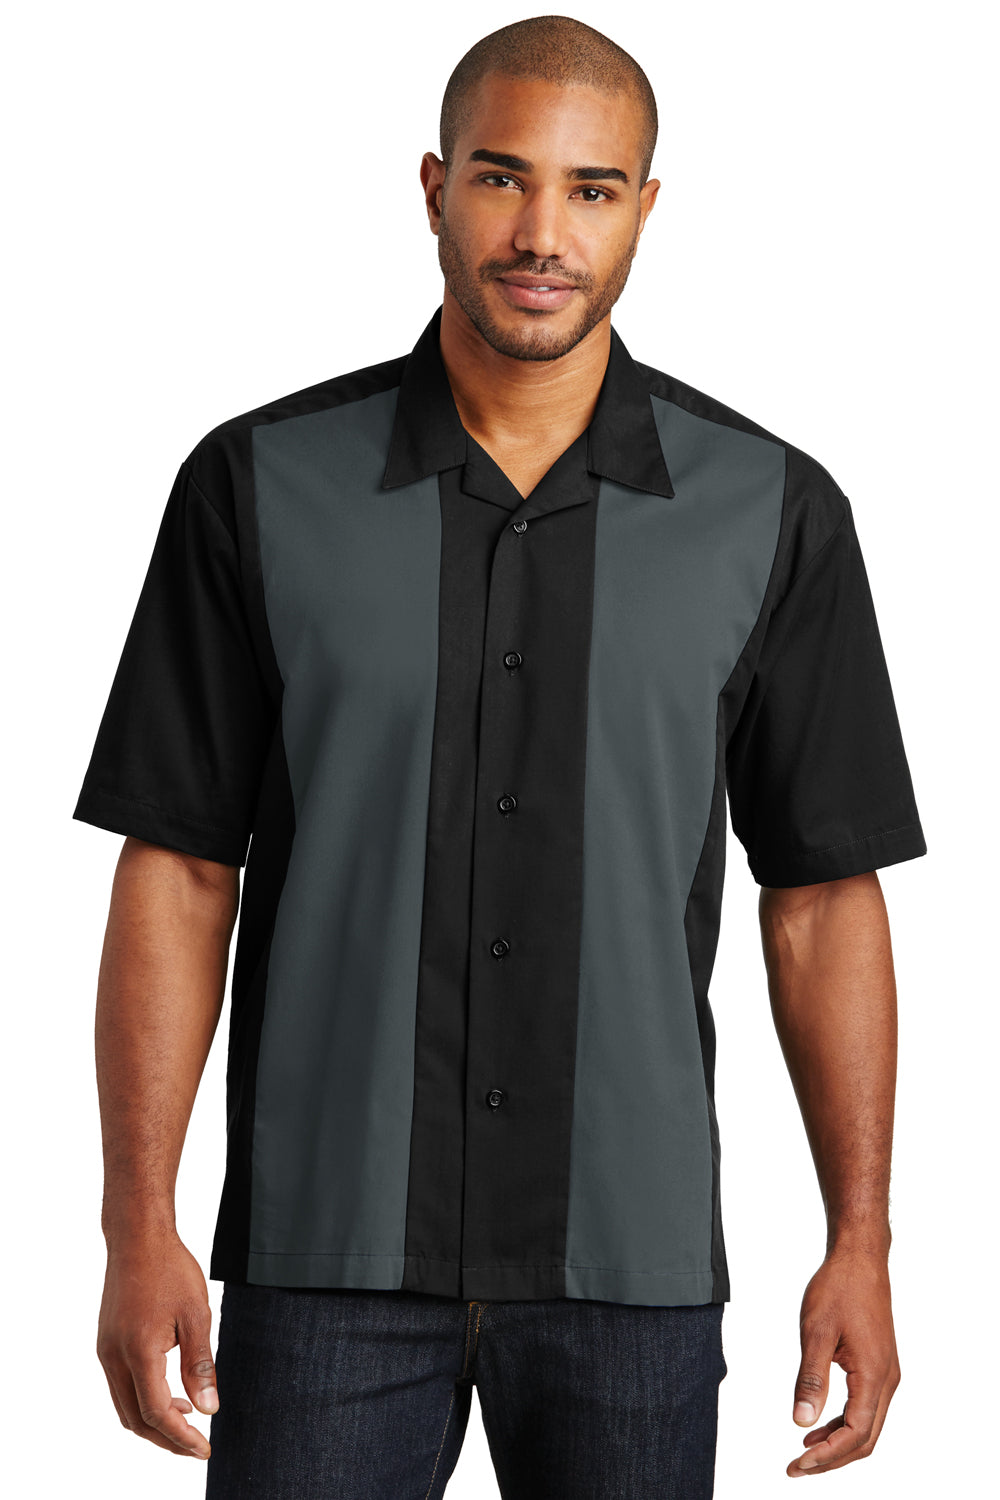 Port Authority S300 Mens Retro Easy Care Wrinkle Resistant Short Sleeve Button Down Camp Shirt Black/Steel Grey Front